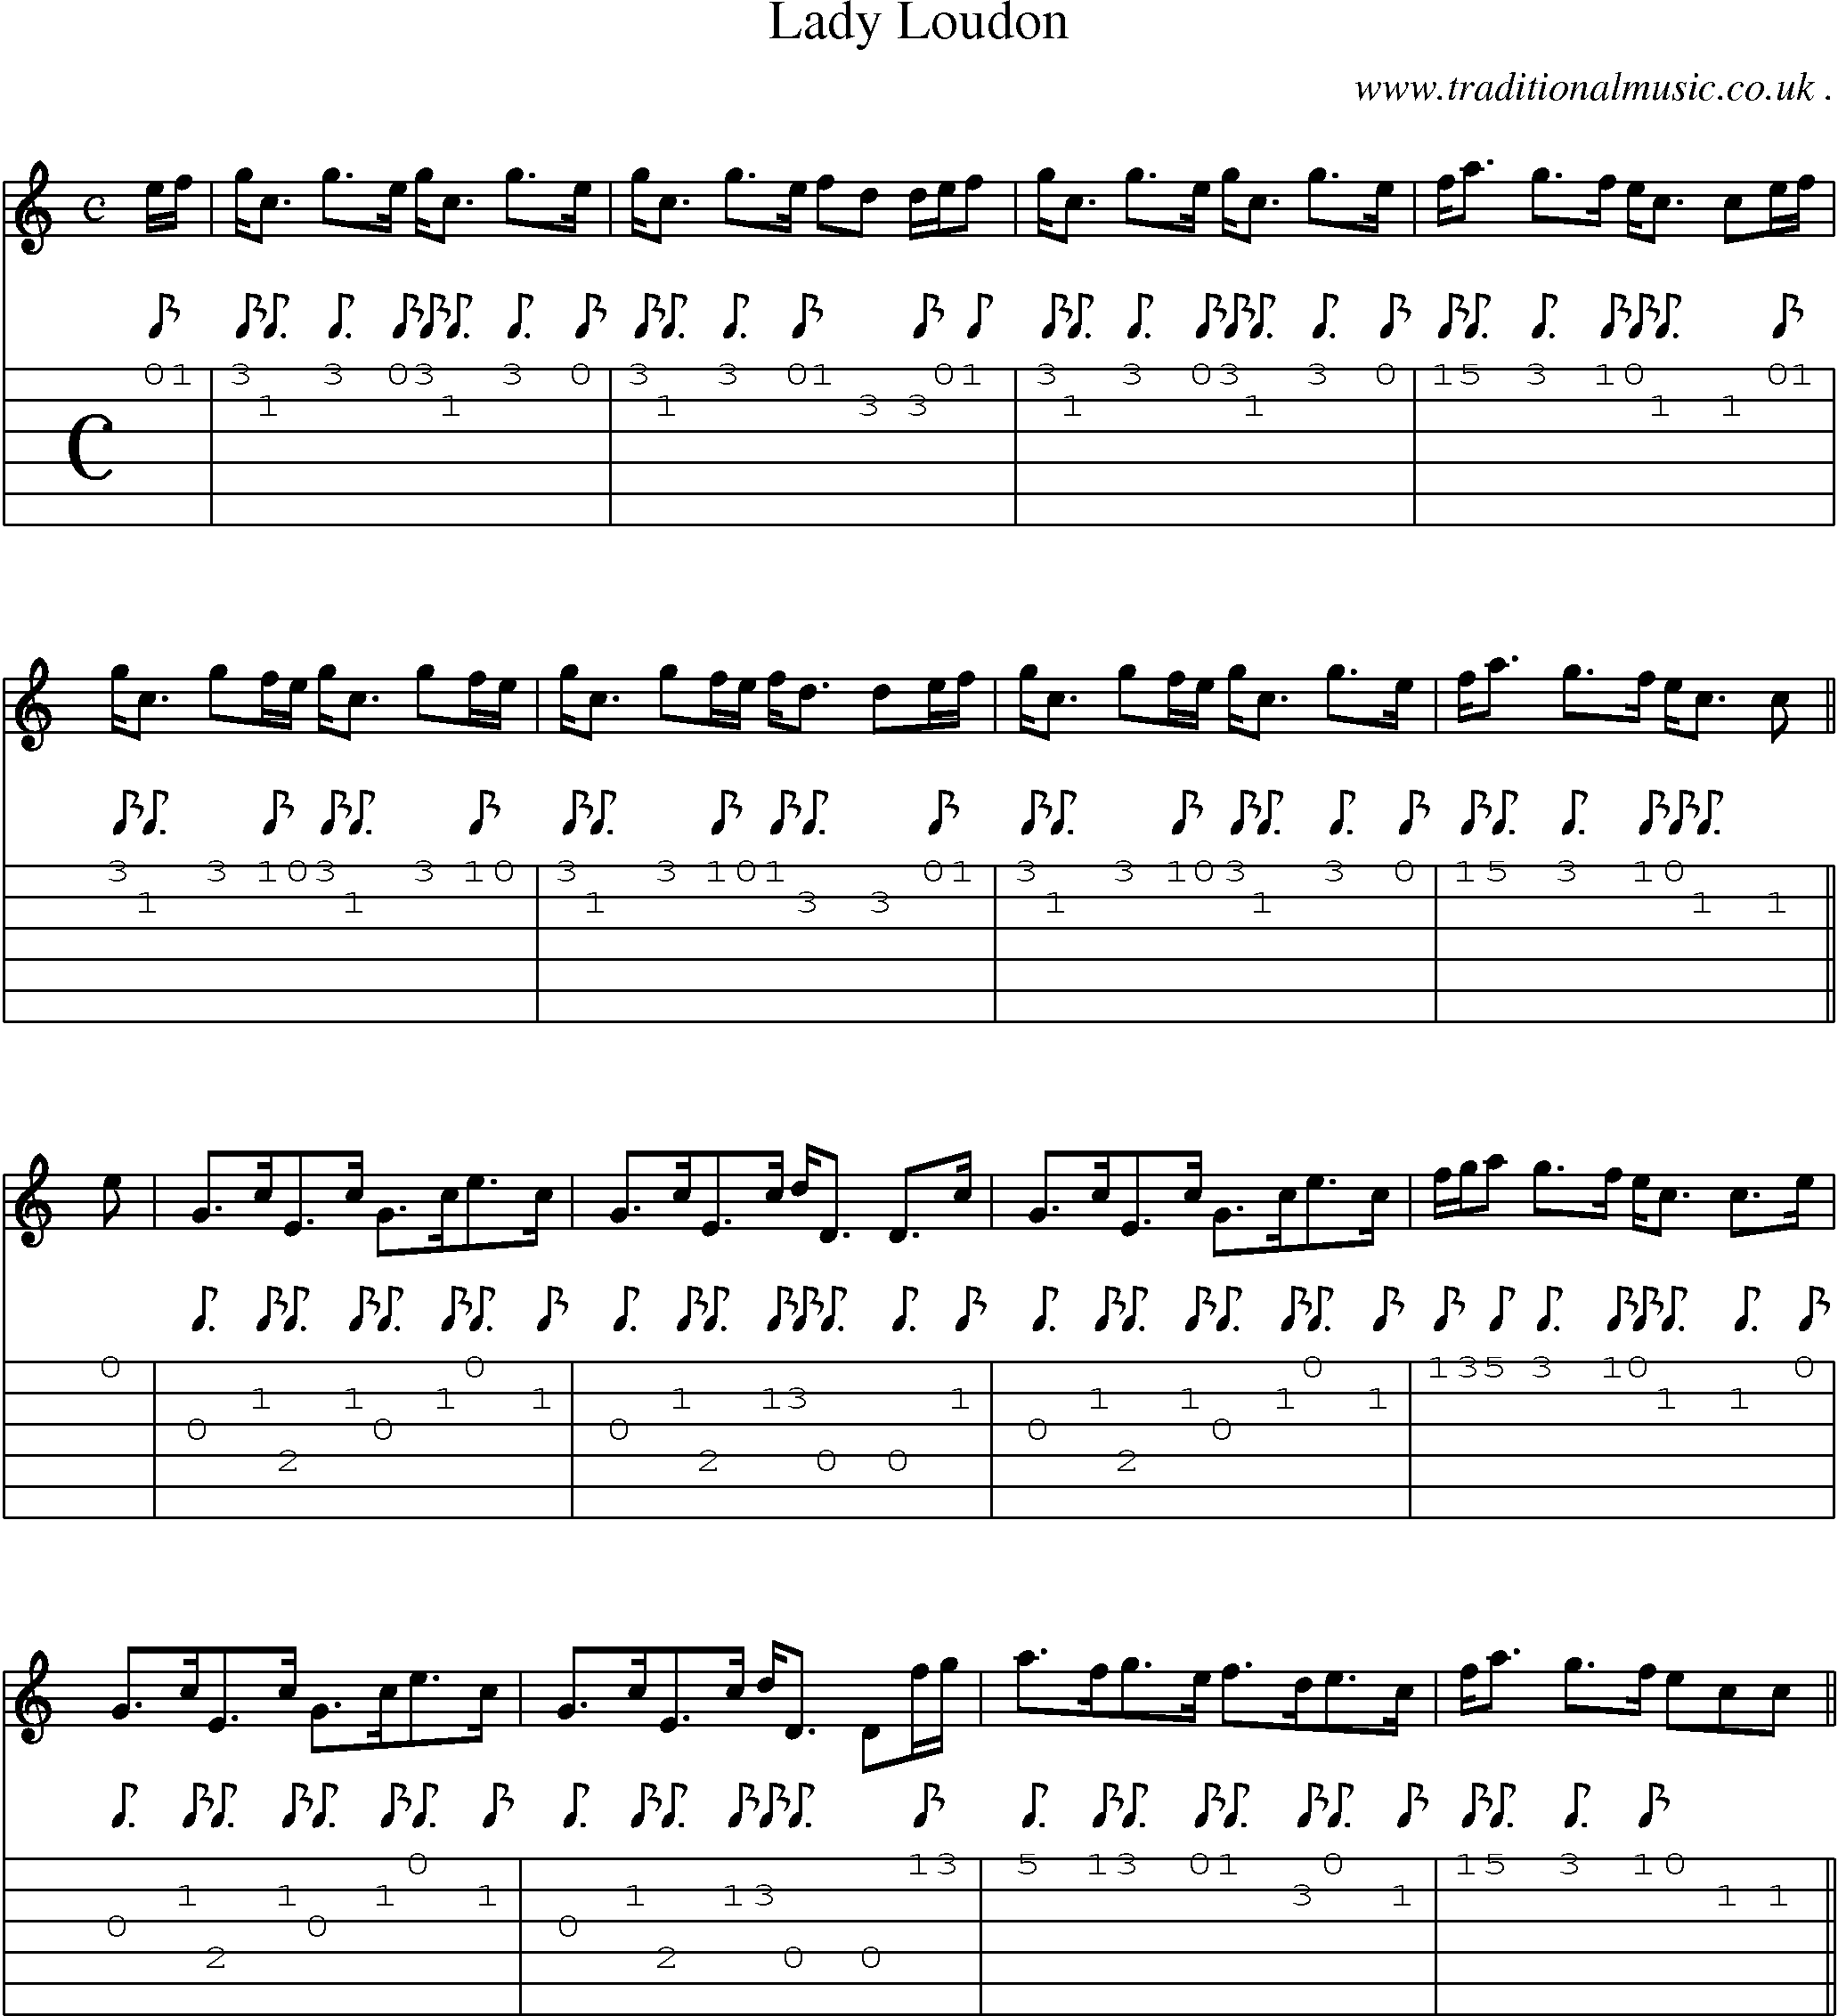 Sheet-music  score, Chords and Guitar Tabs for Lady Loudon